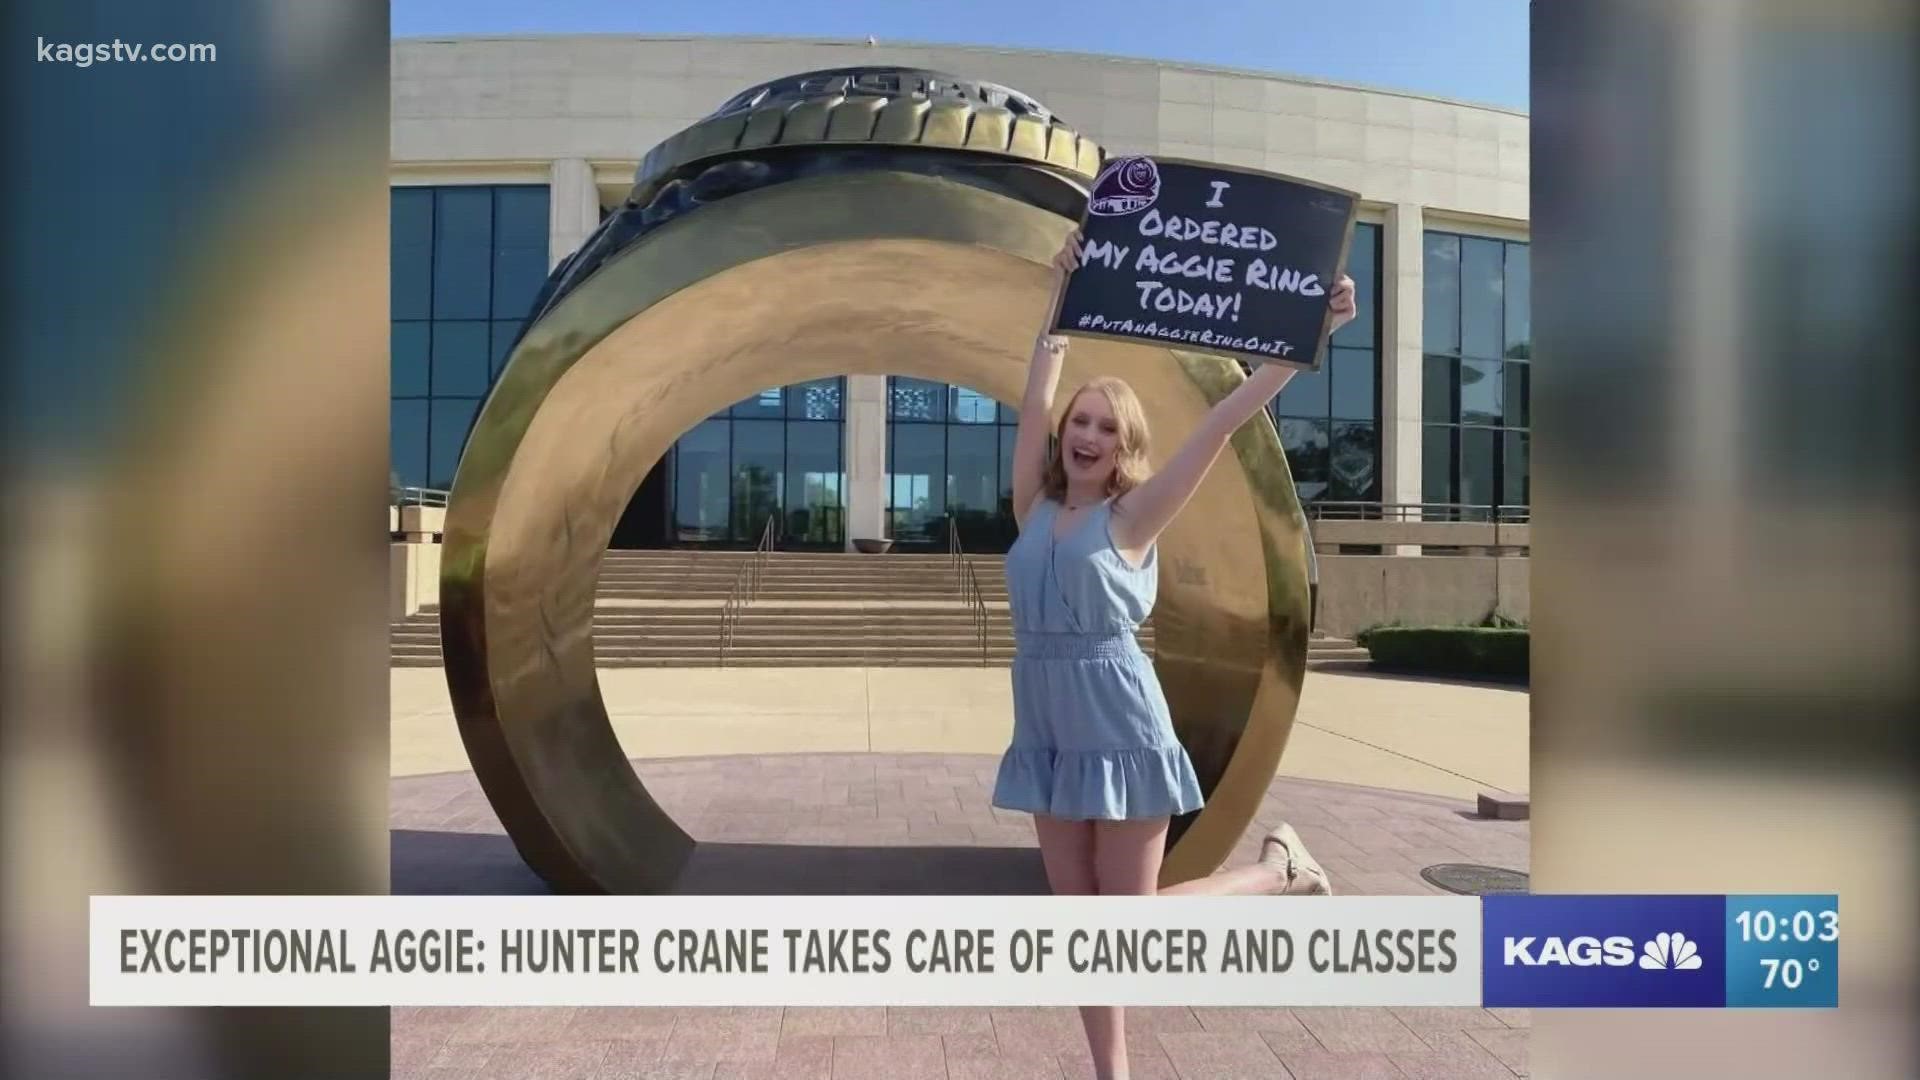 Hunter Crane was just a regular student looking forward to her last few semesters of college when her life changed forever.